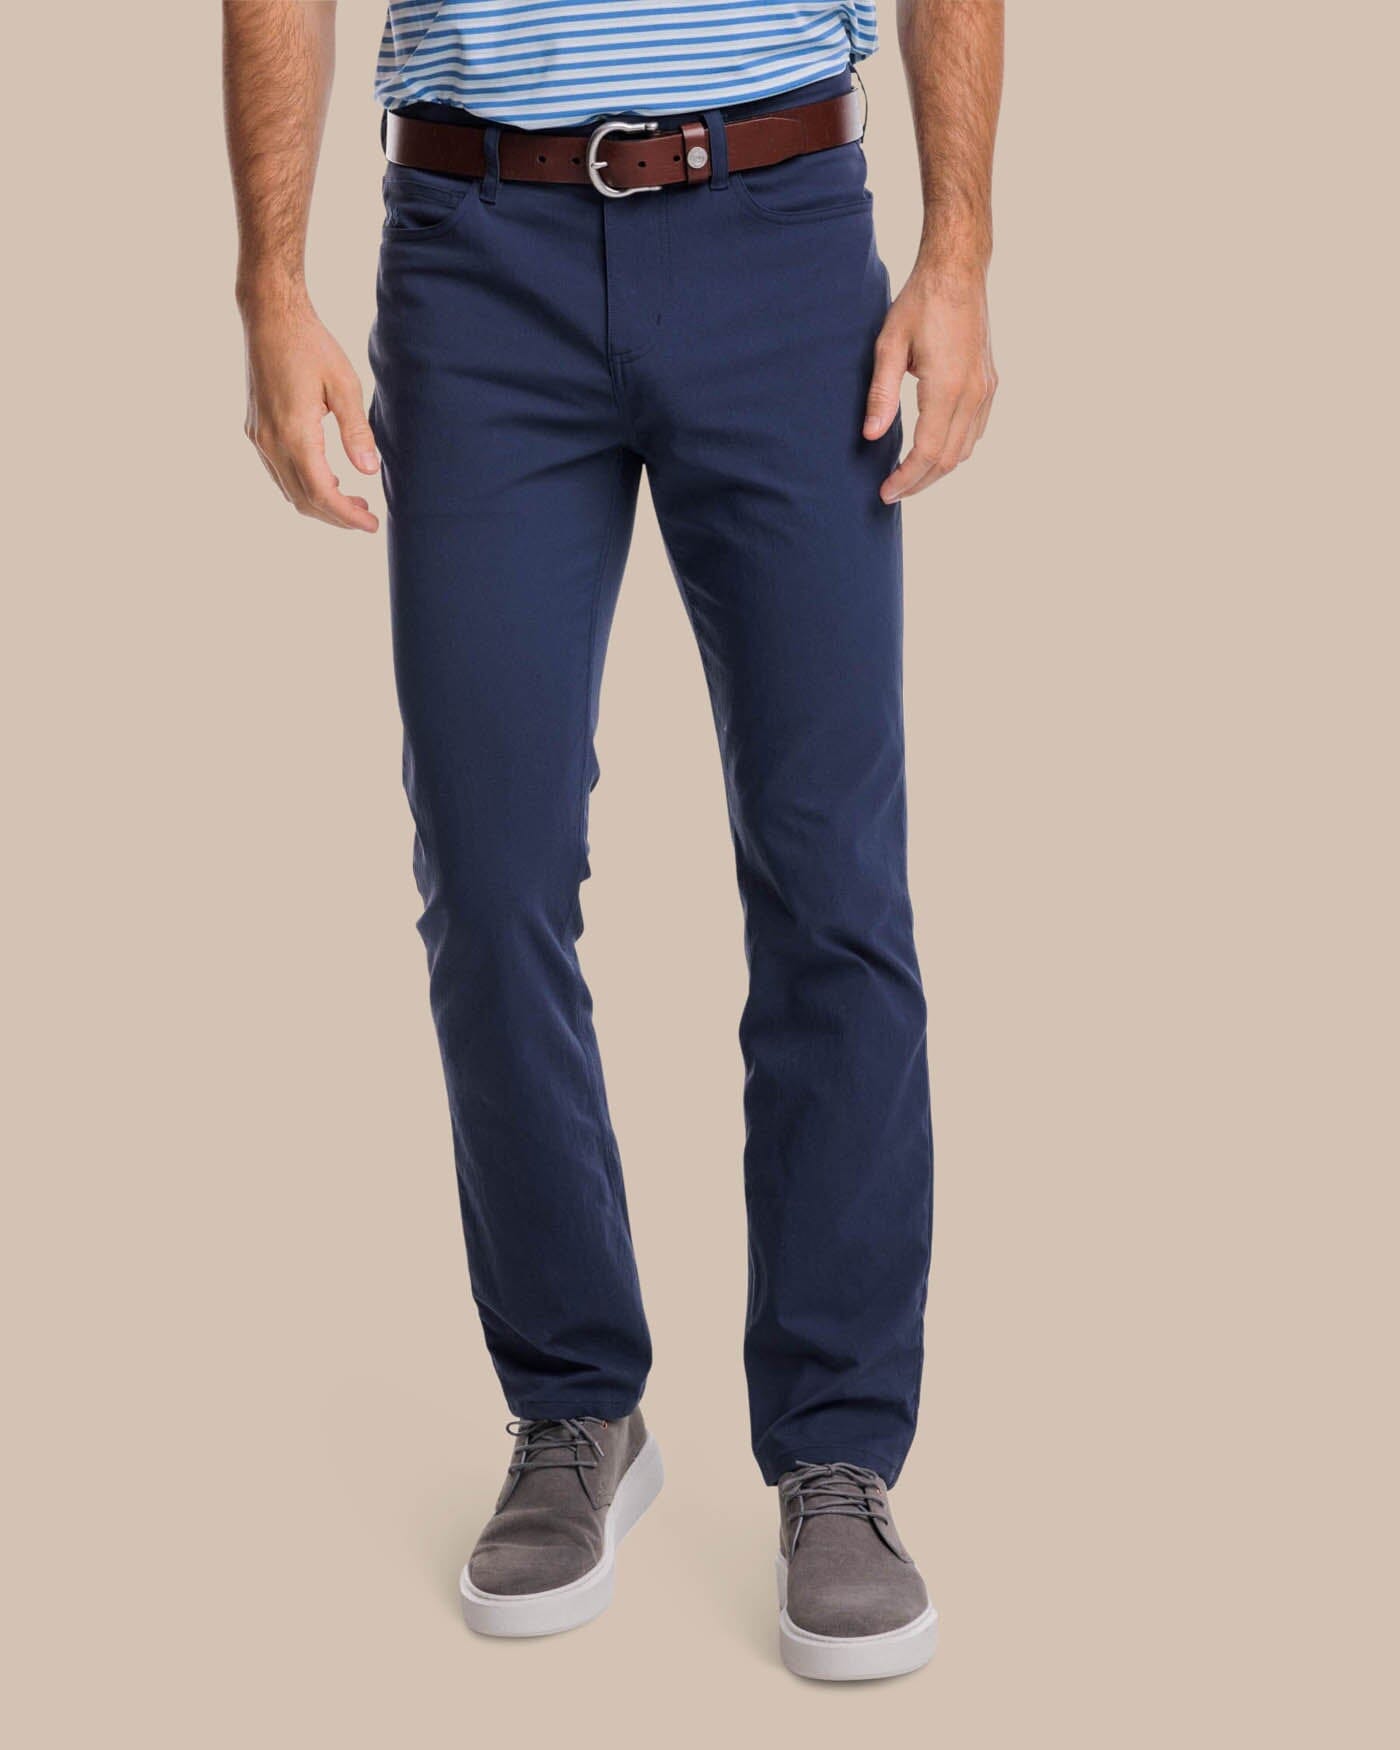 Men's Business Casual Pants - Navy Slim Fit Chino Pants – Southern 